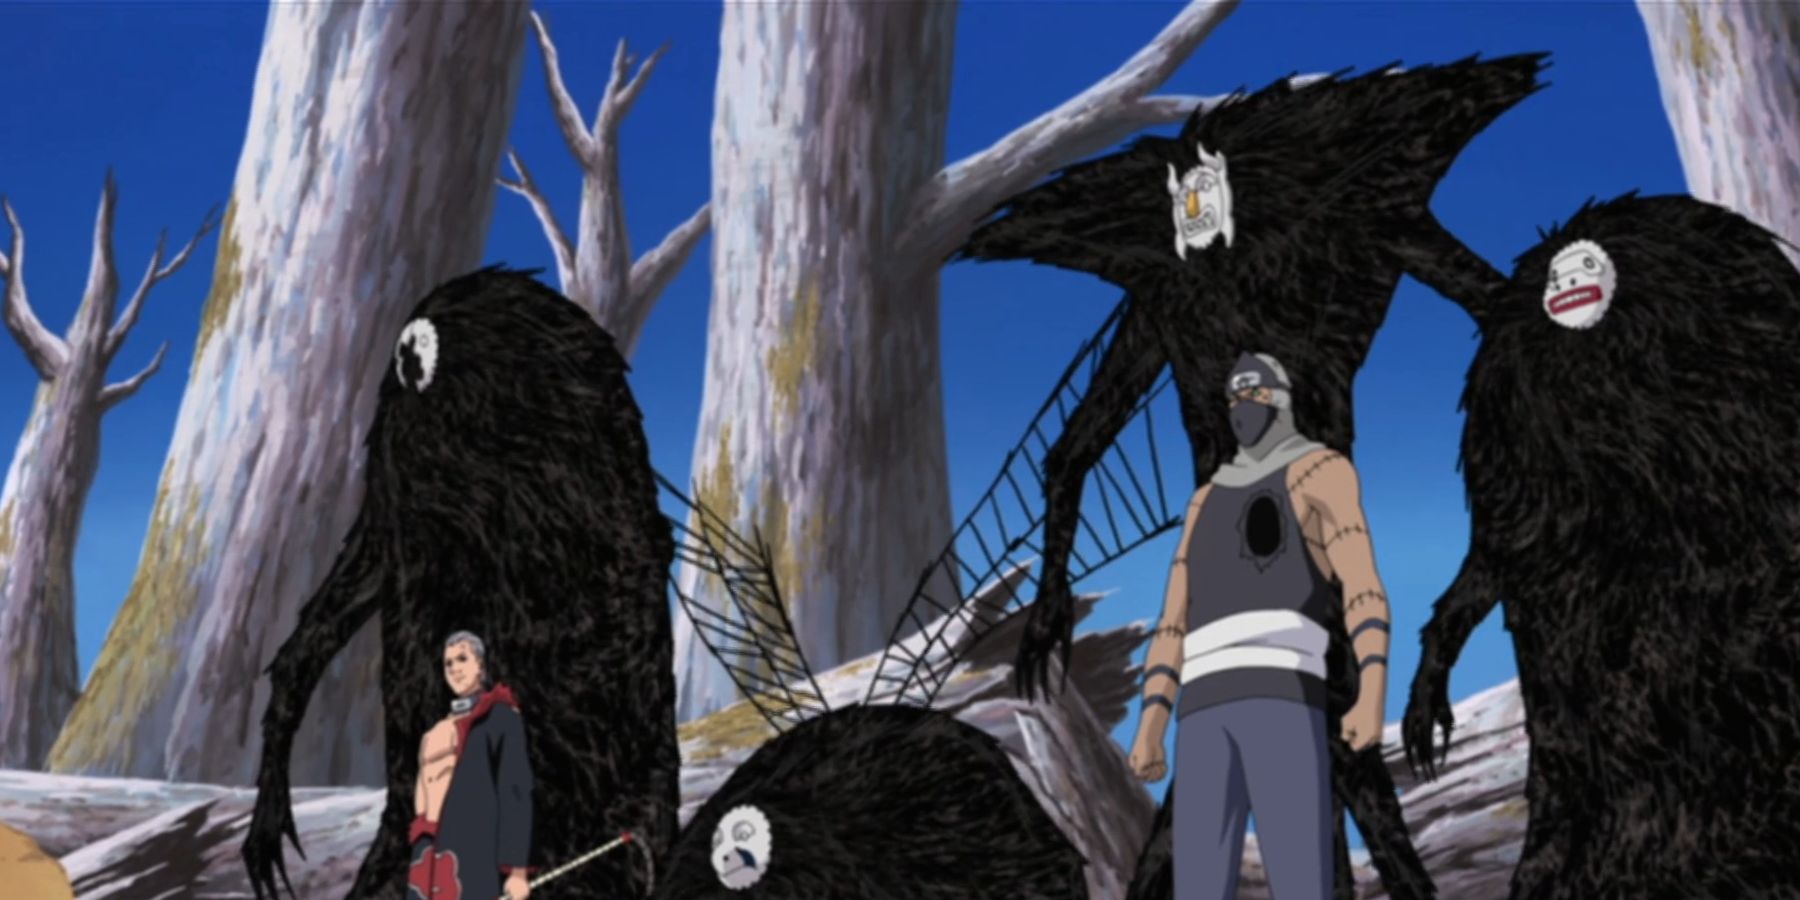 Kakuzu Using The Masked Beasts Of His Earth Grudge Fear Technique